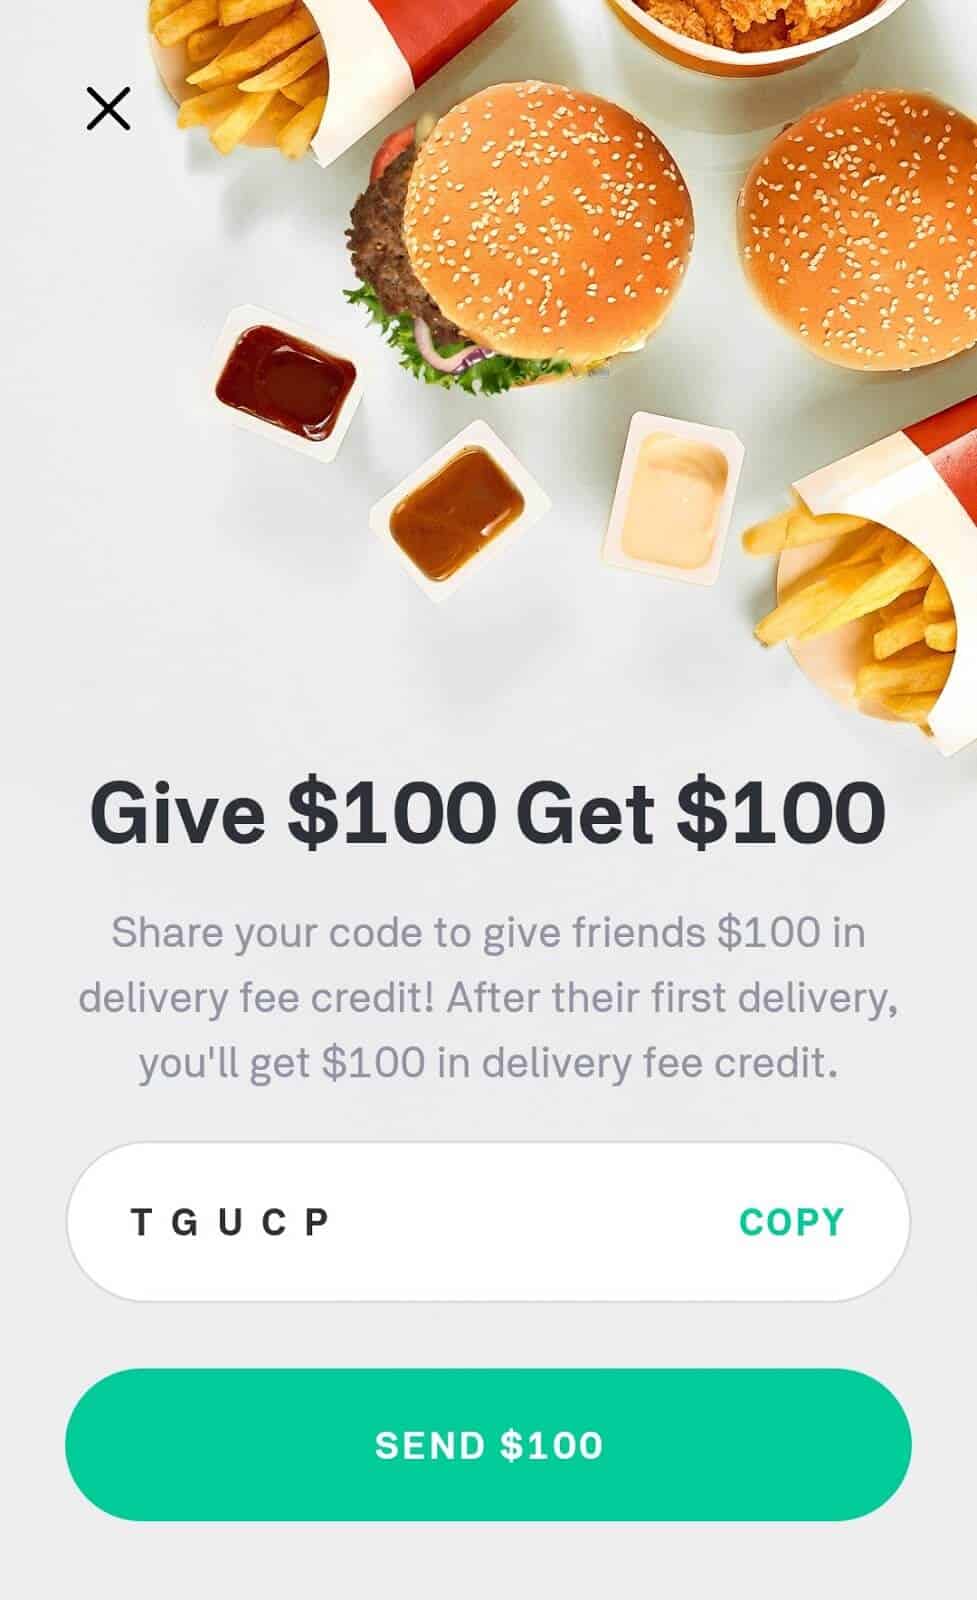 Postmates Promo Code for Existing Users: promo code screen